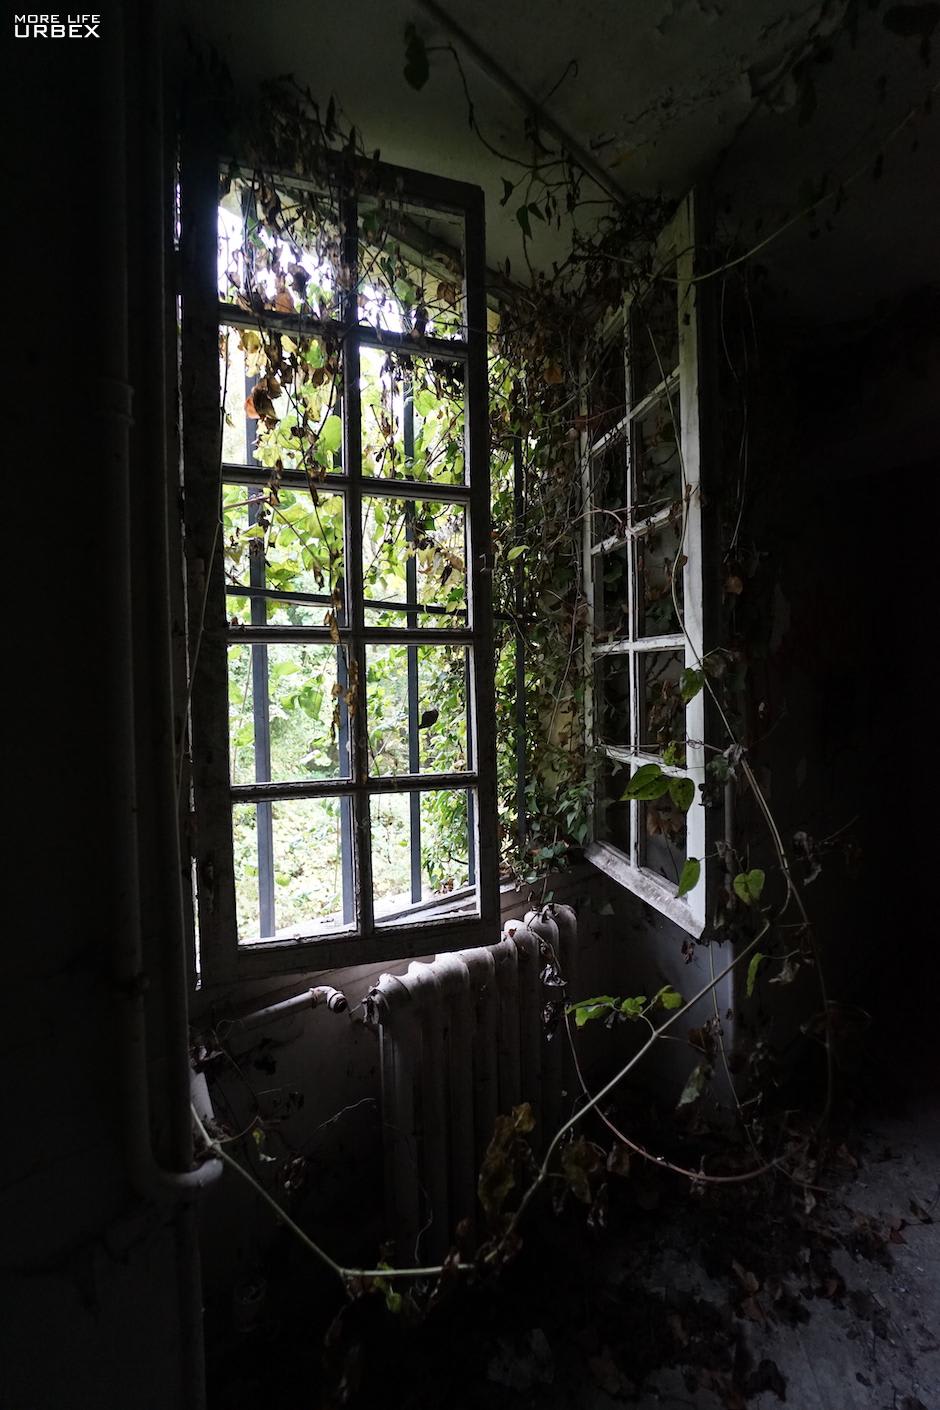 In an overgrown castle in France.